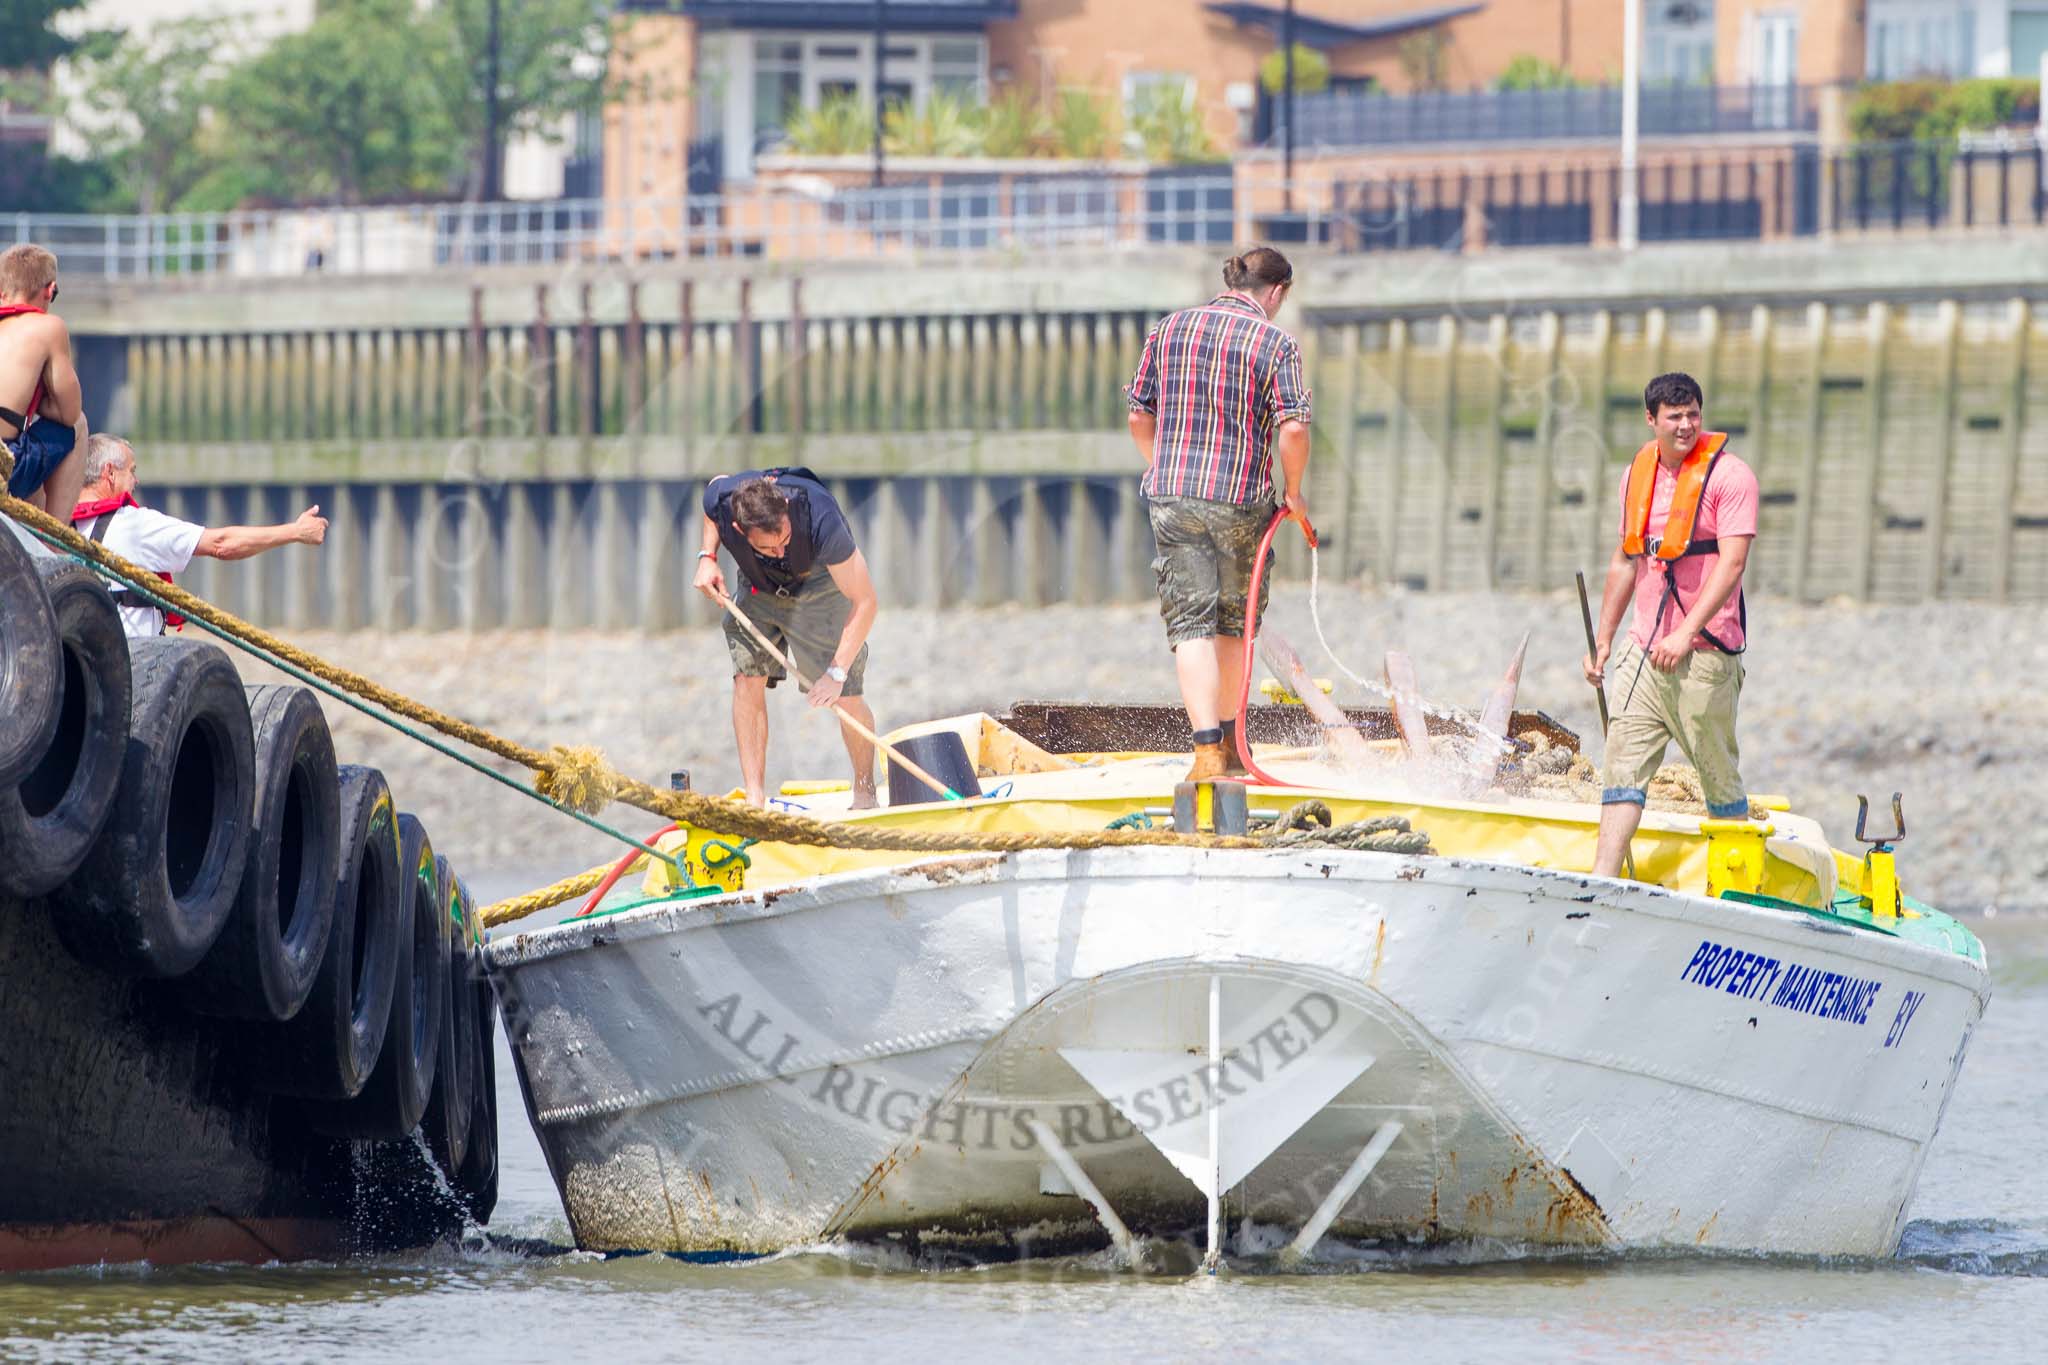 TOW River Thames Barge Driving Race 2013: Preparations for the race on board of barge "Hoppy", by GPS Fabrication, on the way to the start..
River Thames between Greenwich and Westminster,
London,

United Kingdom,
on 13 July 2013 at 12:14, image #54